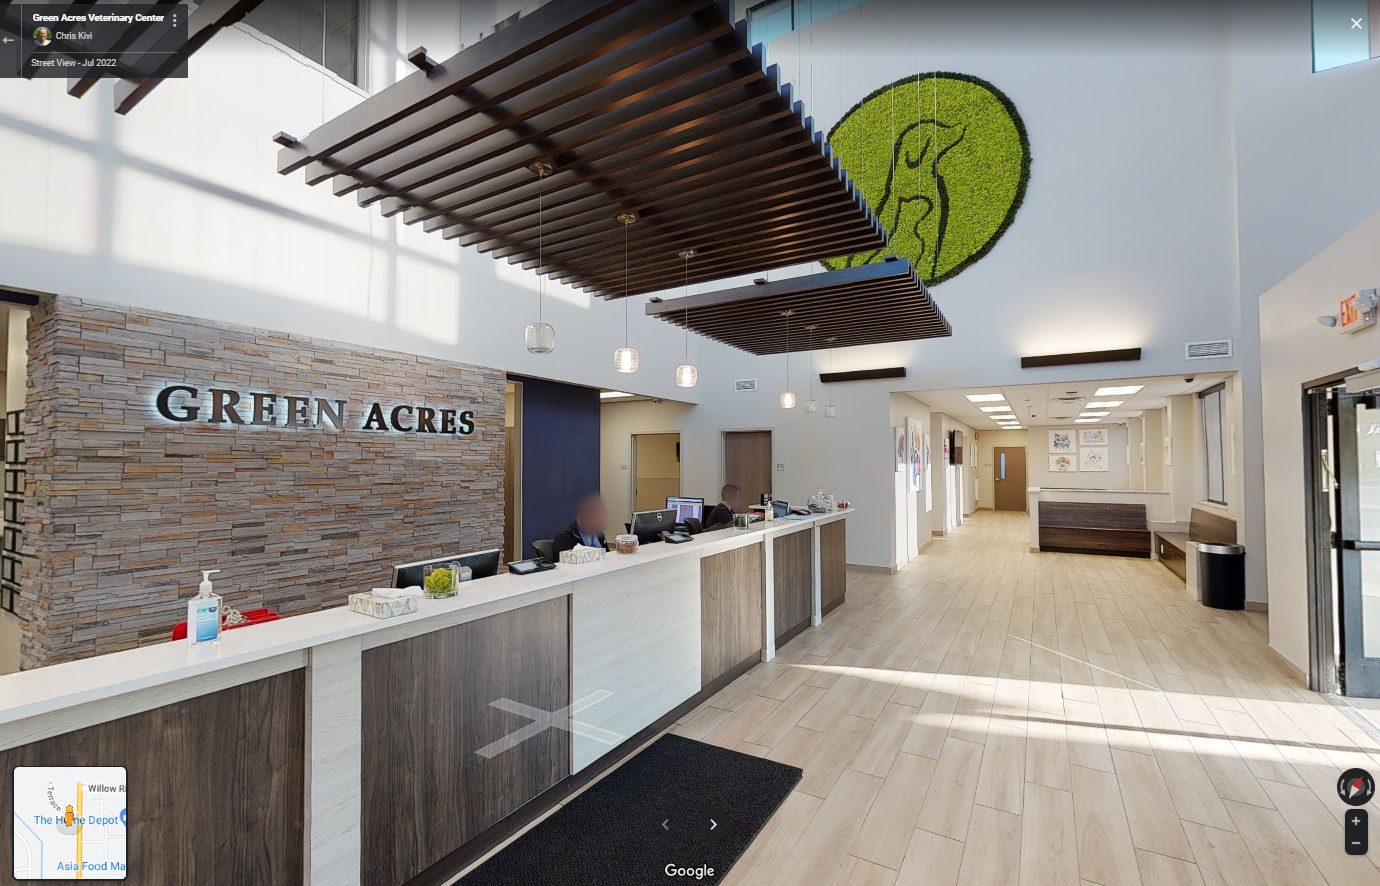 Green Acres Veterinary hospital 3D tour for Google Maps was created with Matterport